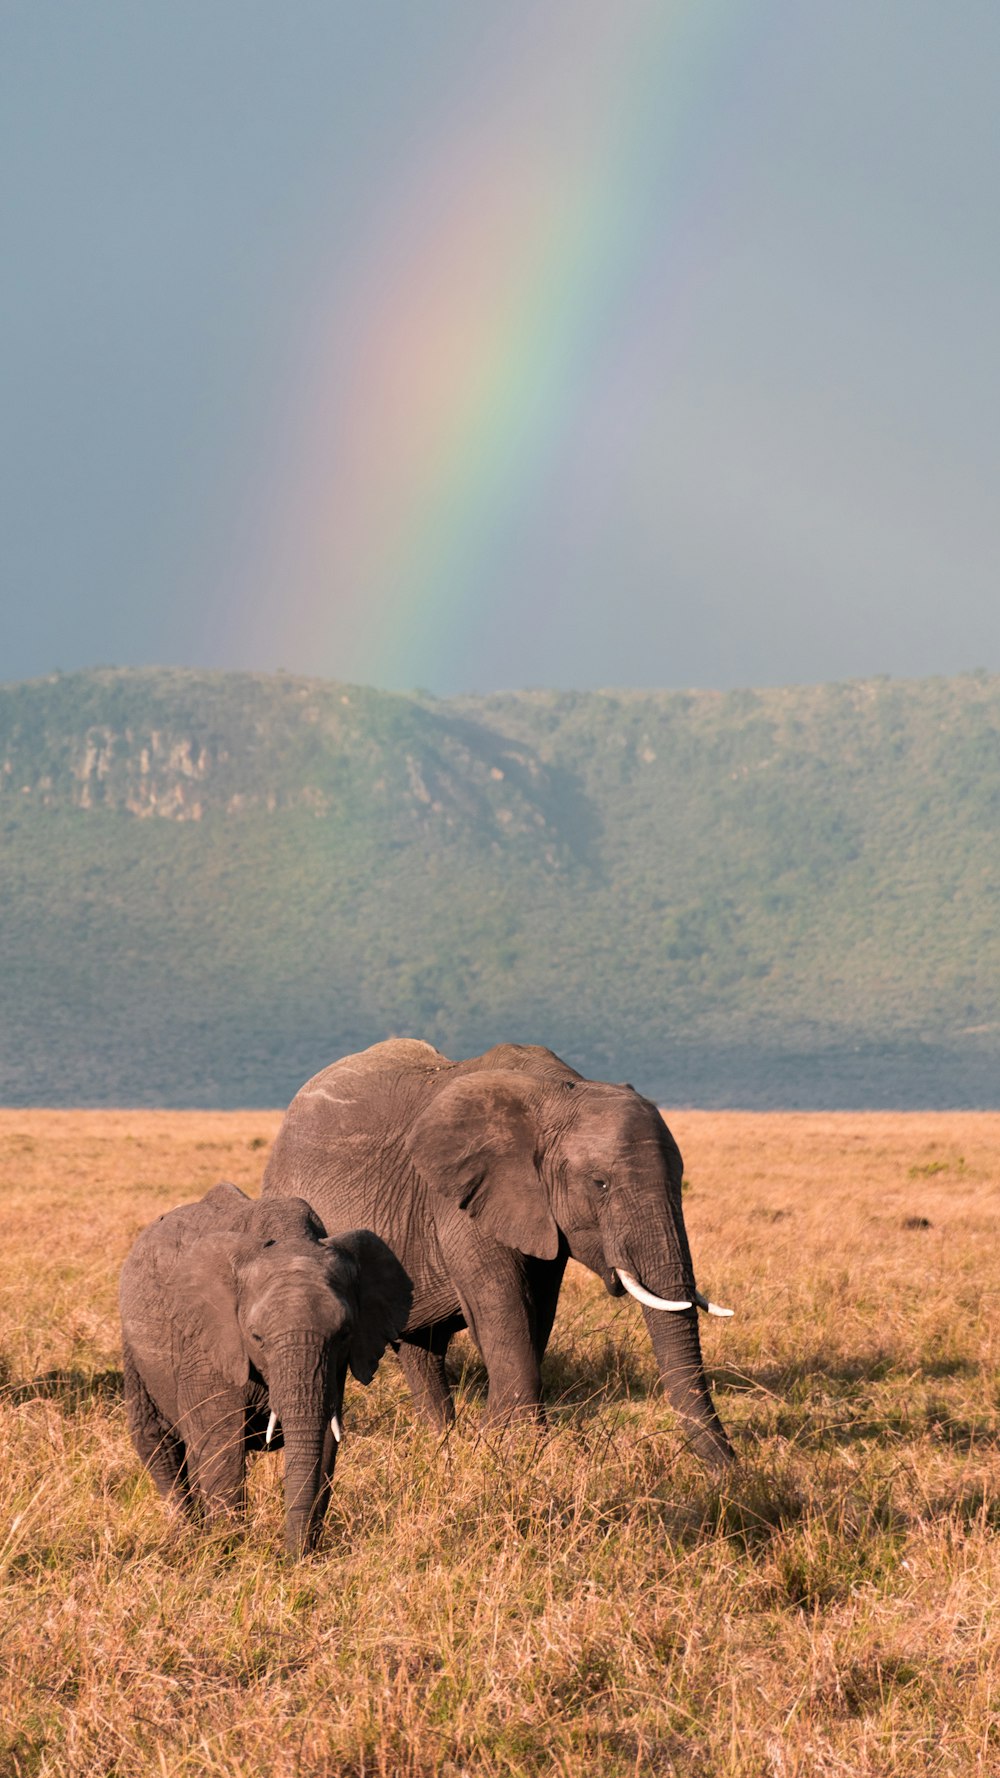 two elephants in a field with a rainbow in the background